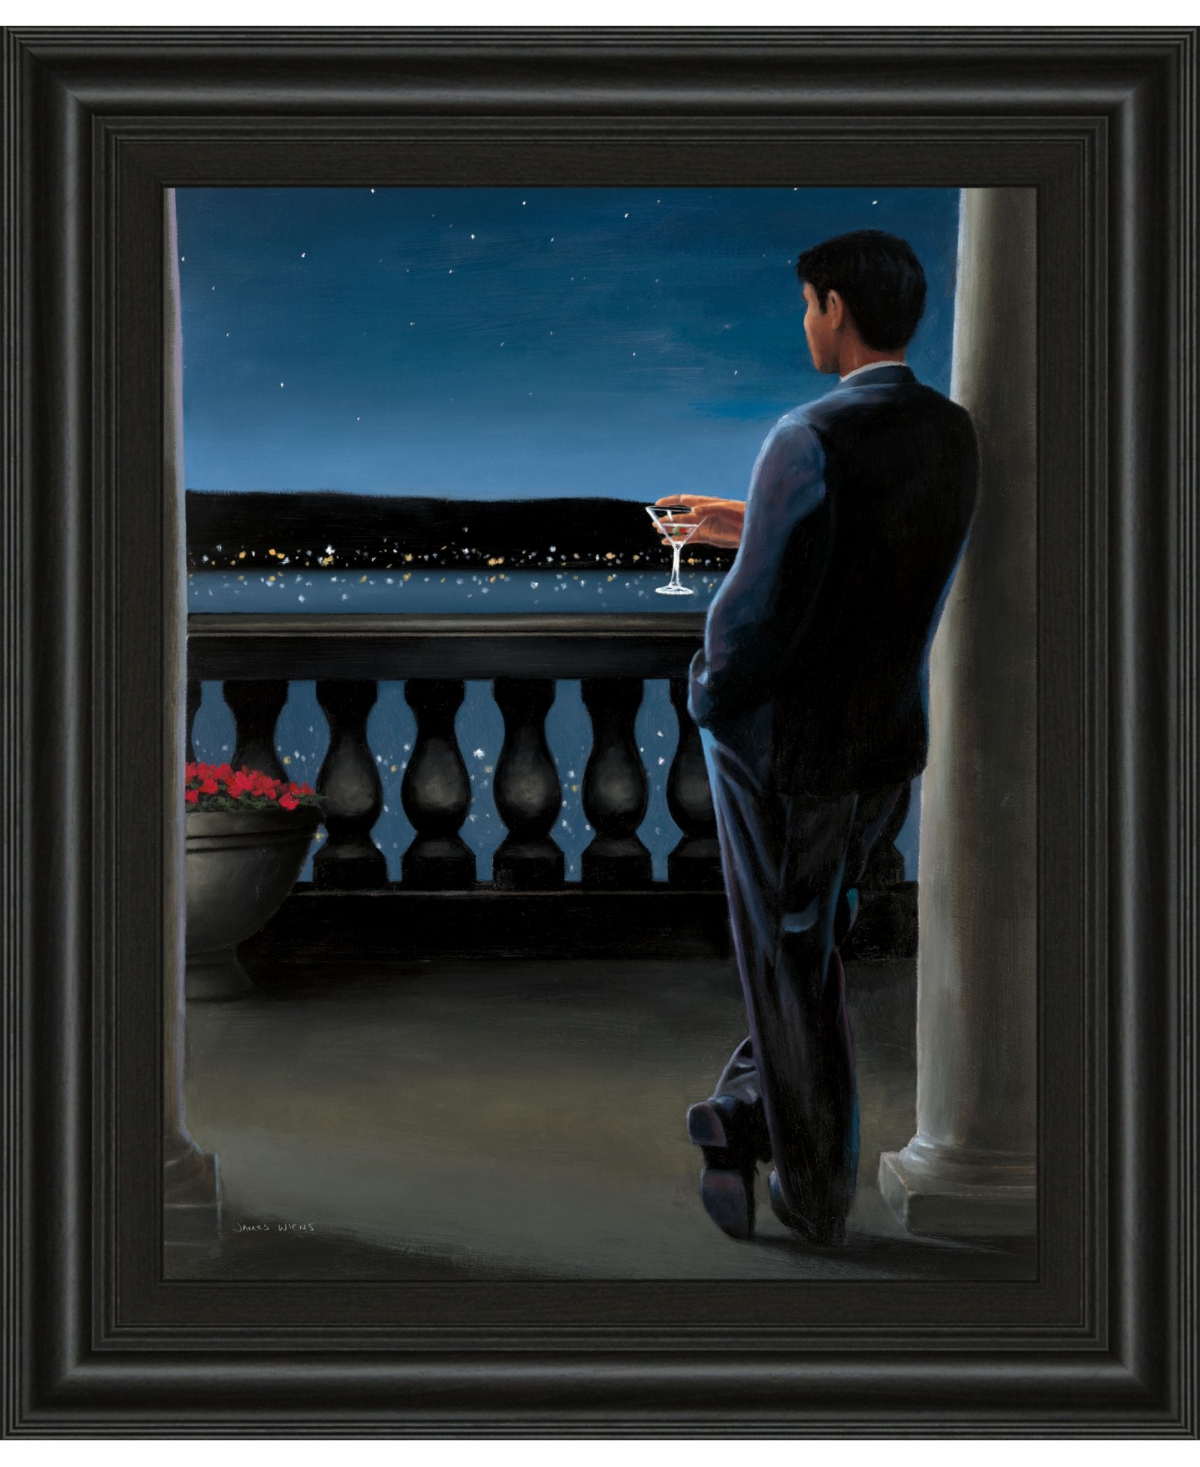 Thinking of Her by James Wiens Framed Print Wall Art, 22" x 26" - Blue